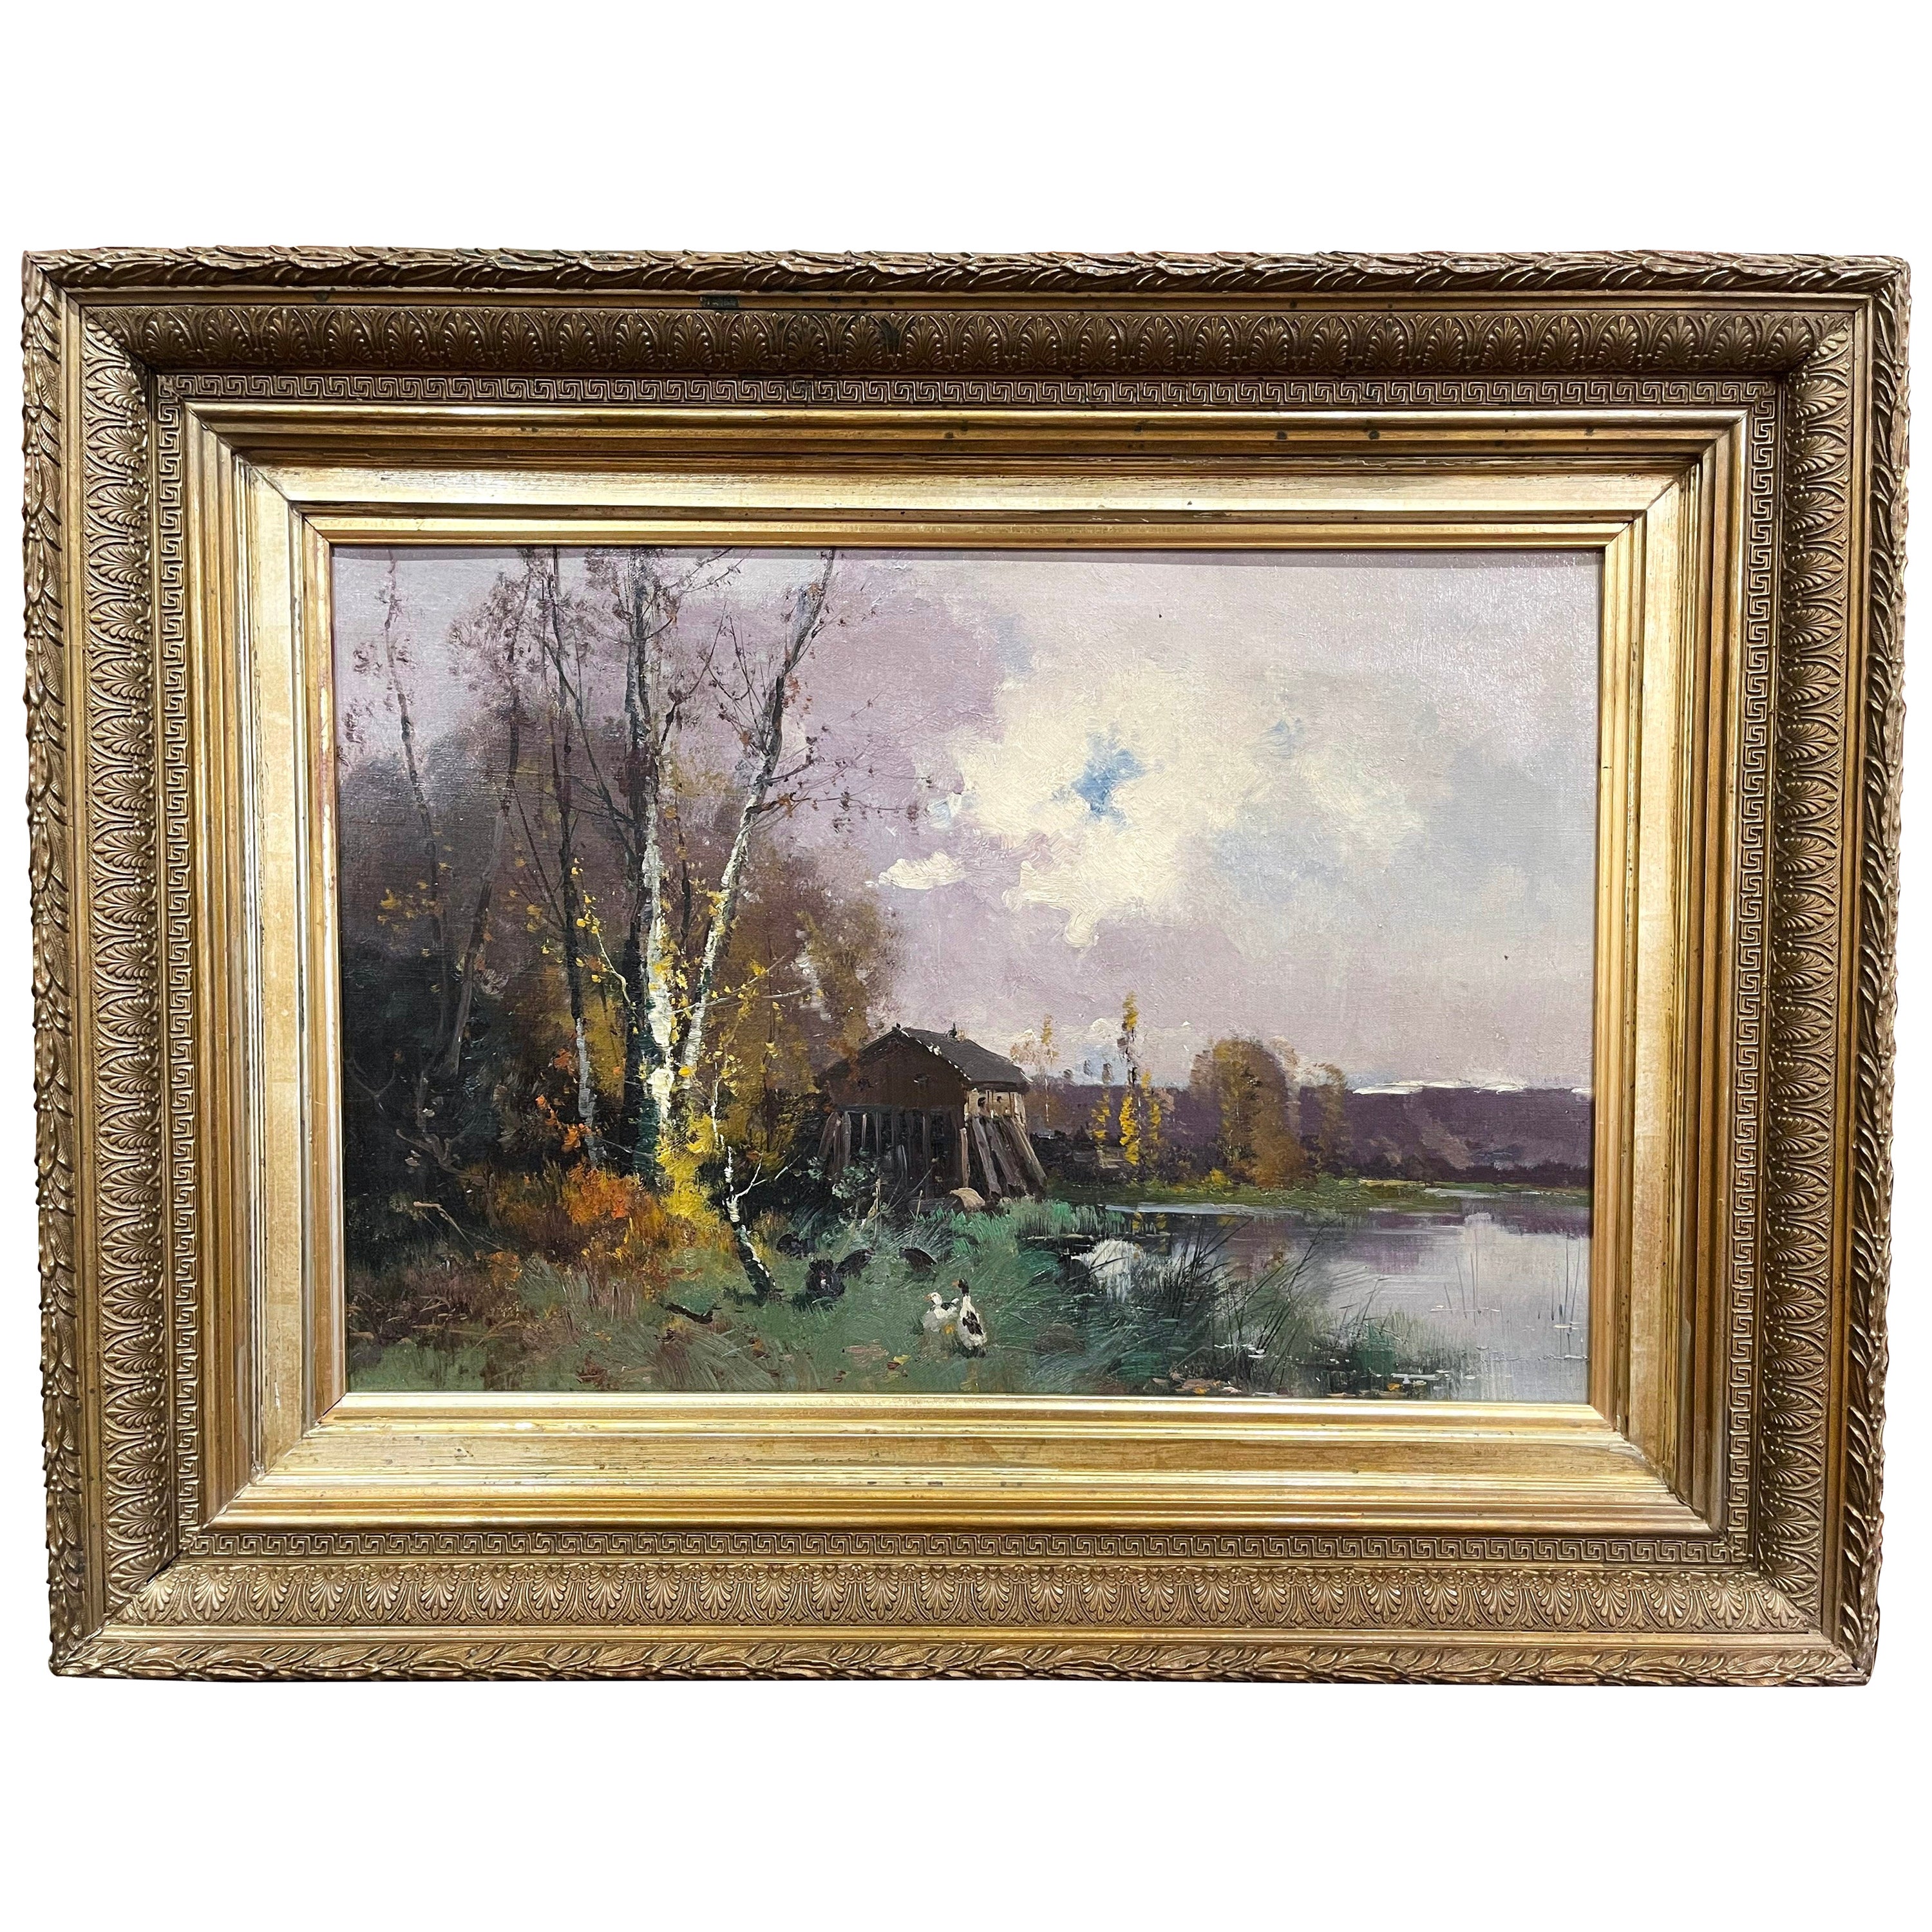 19th Century French Oil Painting on Canvas in Gilt Frame Signed E. Galien-Laloue